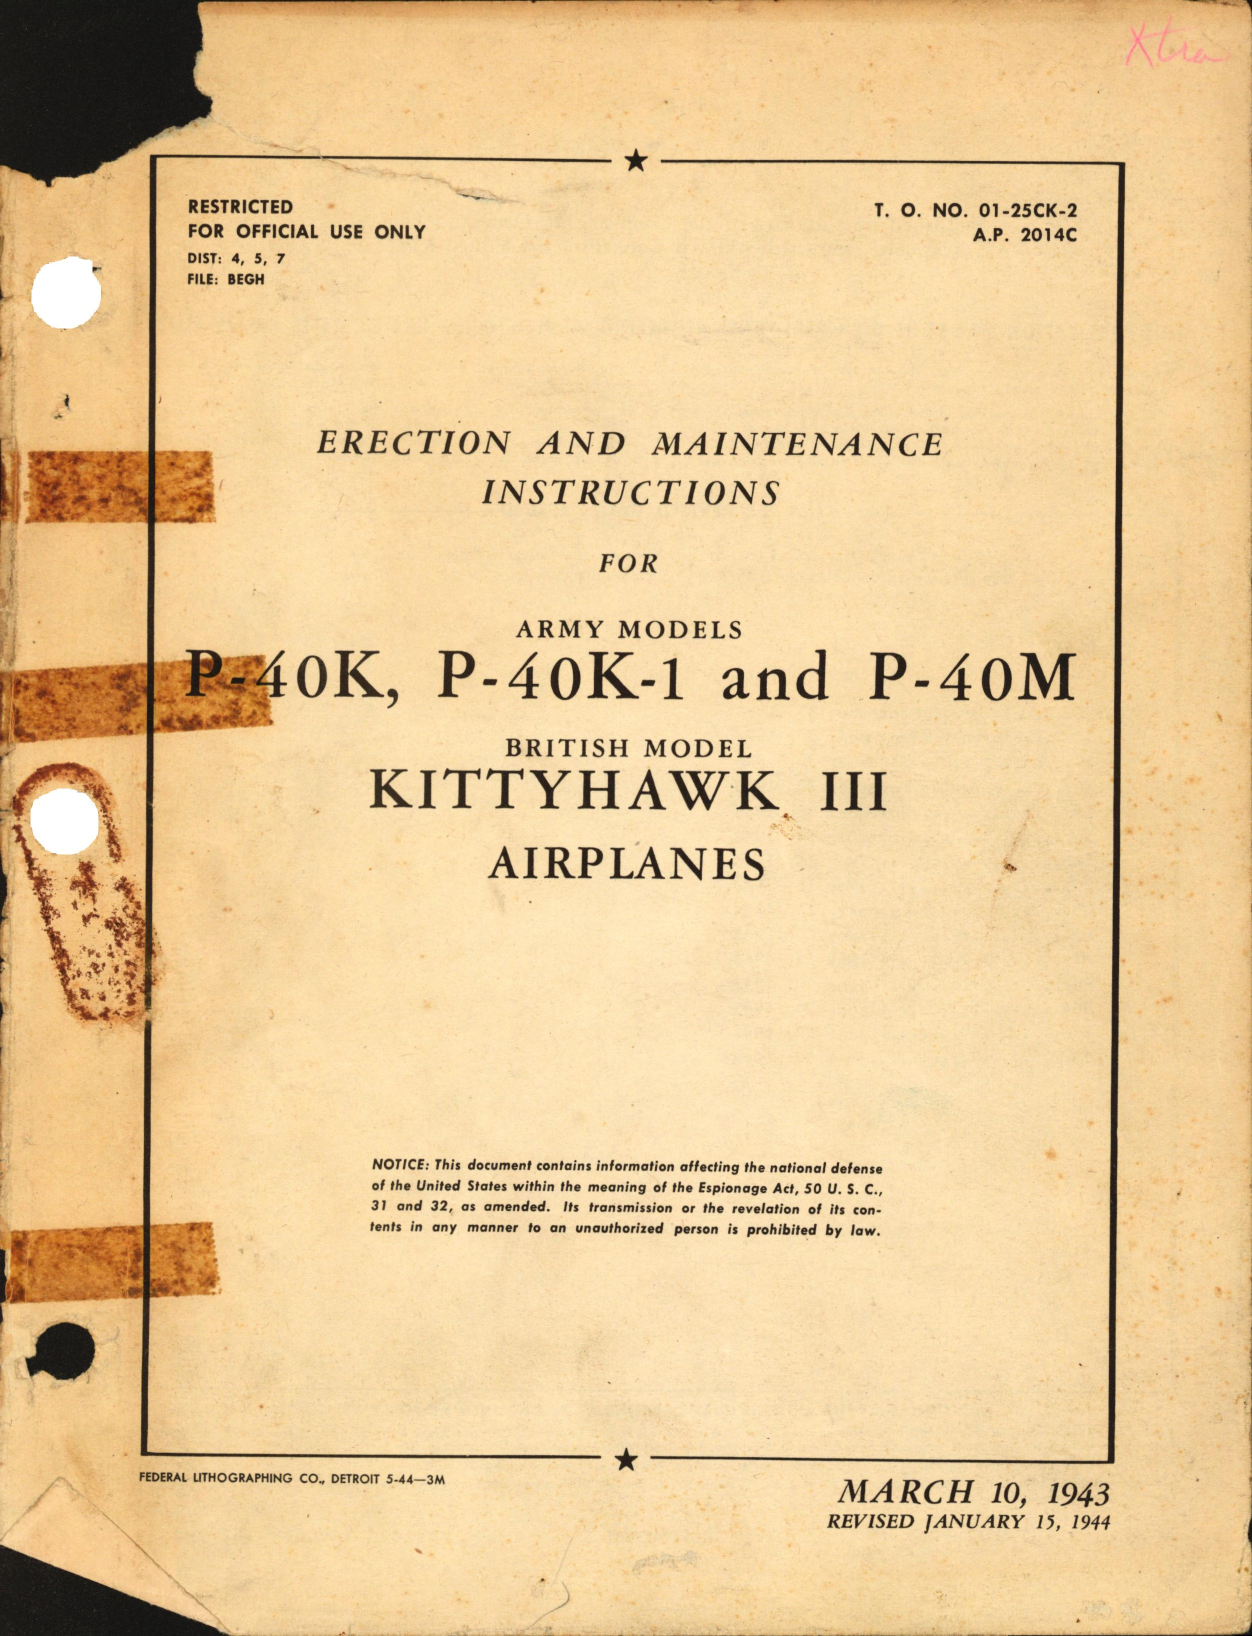 Sample page 1 from AirCorps Library document: Erection and Maintenance Instructions for P-40K, P-40K-1, and P-40M